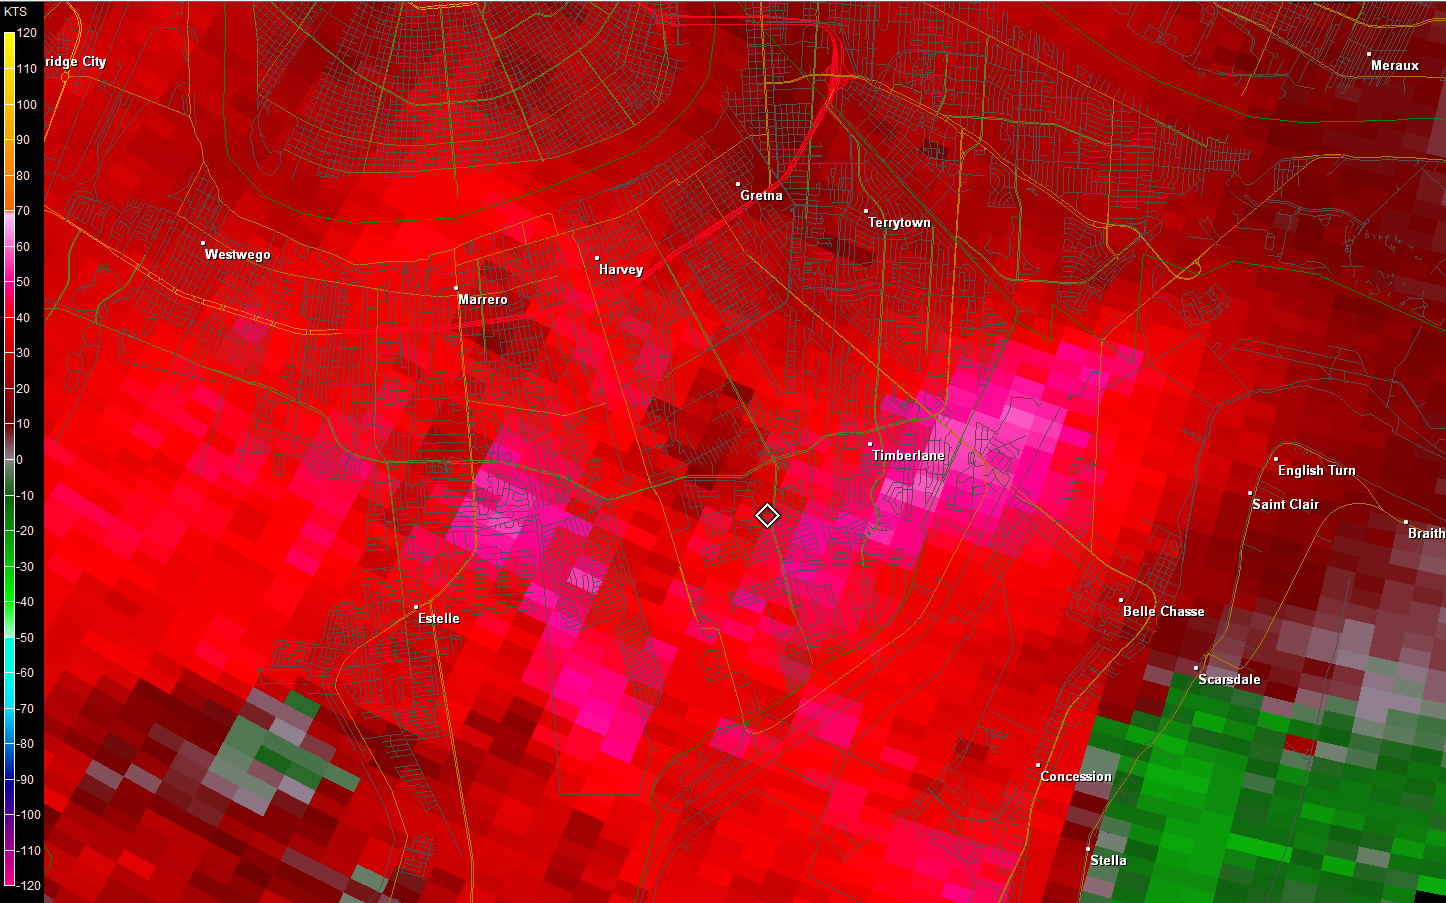 KLIX Storm Relative Velocity product for Harvey, LA straight line winds and hail - 03/29/11